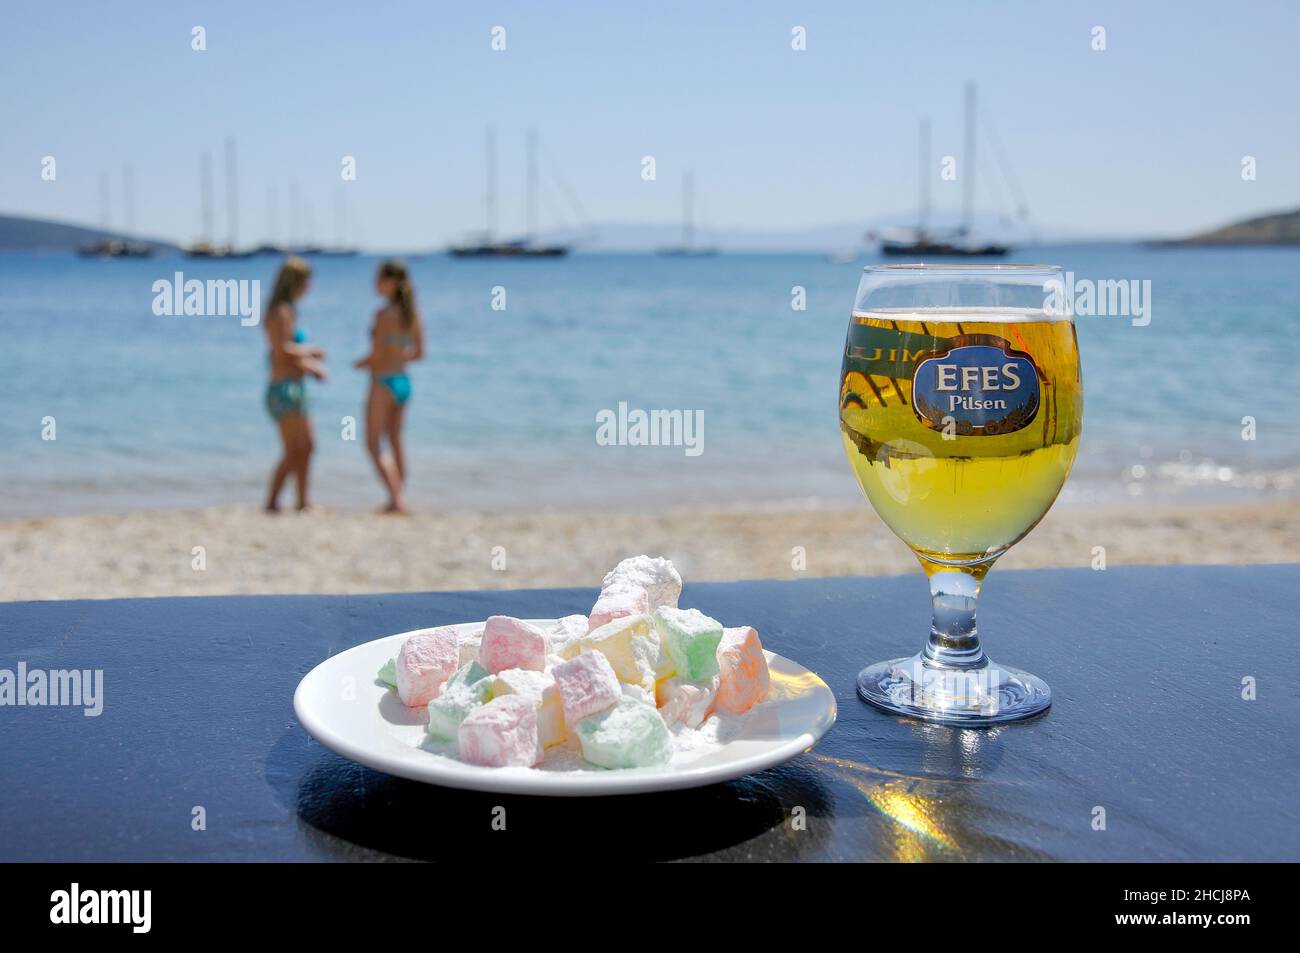 Bottle of Efes Pilsen beer and Turkish Delight confectionery on table, Bodrum Beach, Bodrum, Mugla Province, Turkey Stock Photo